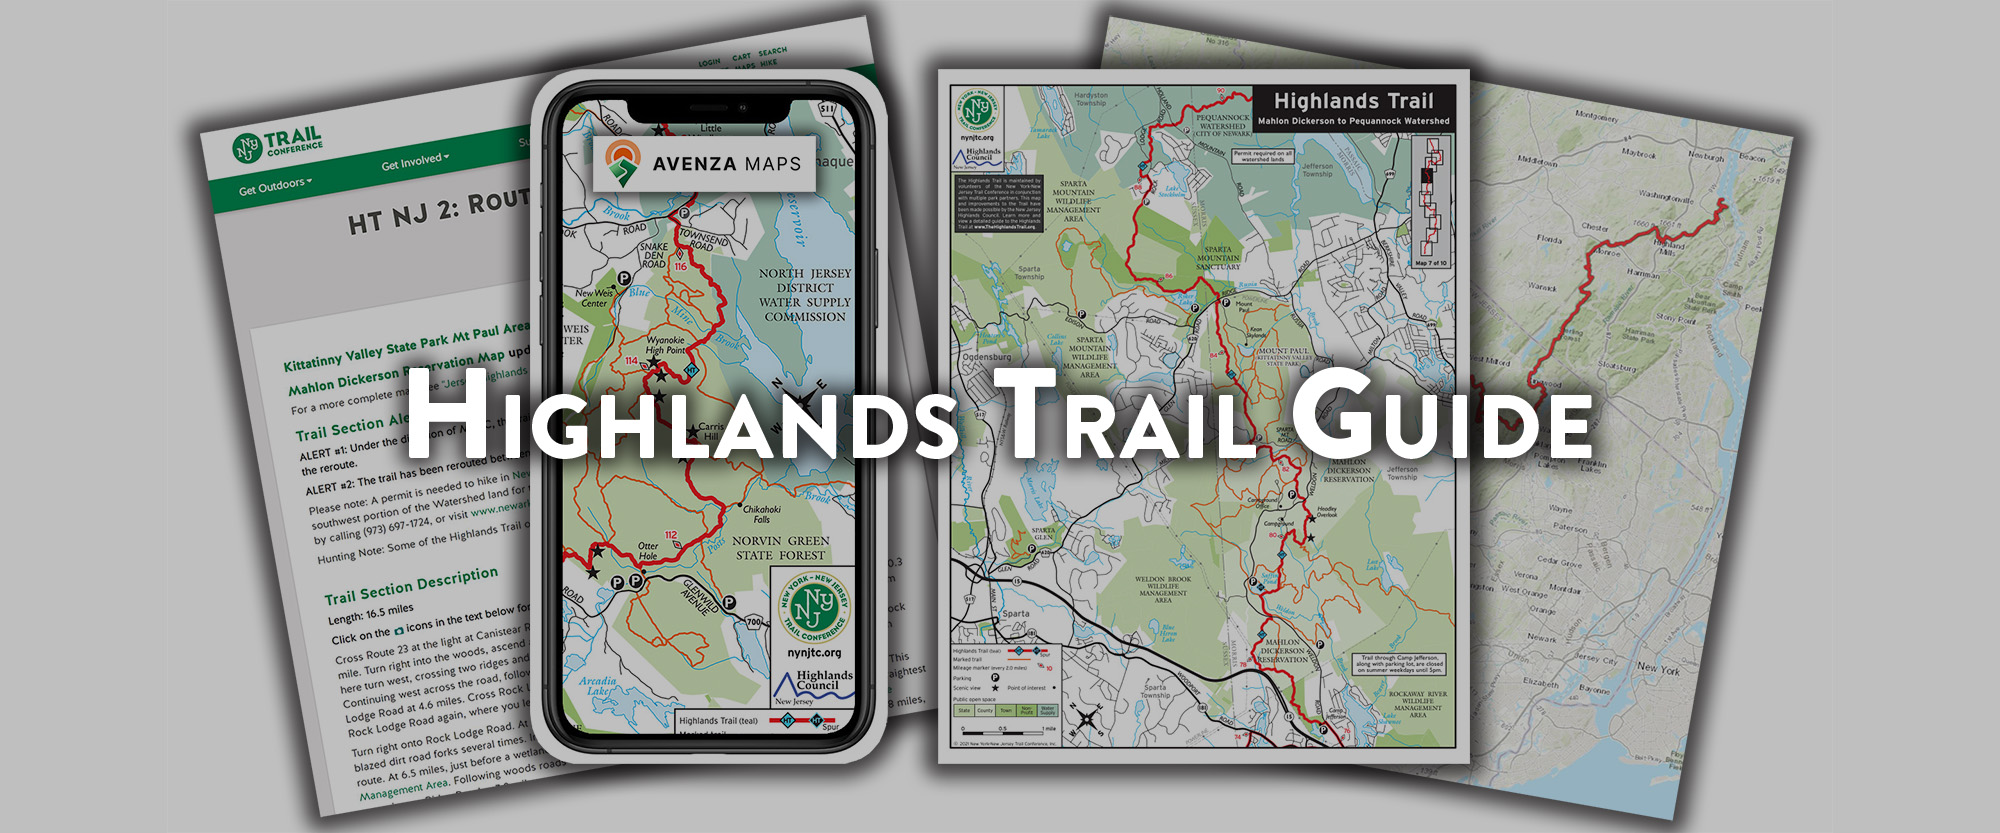 Highlands Trail Guide